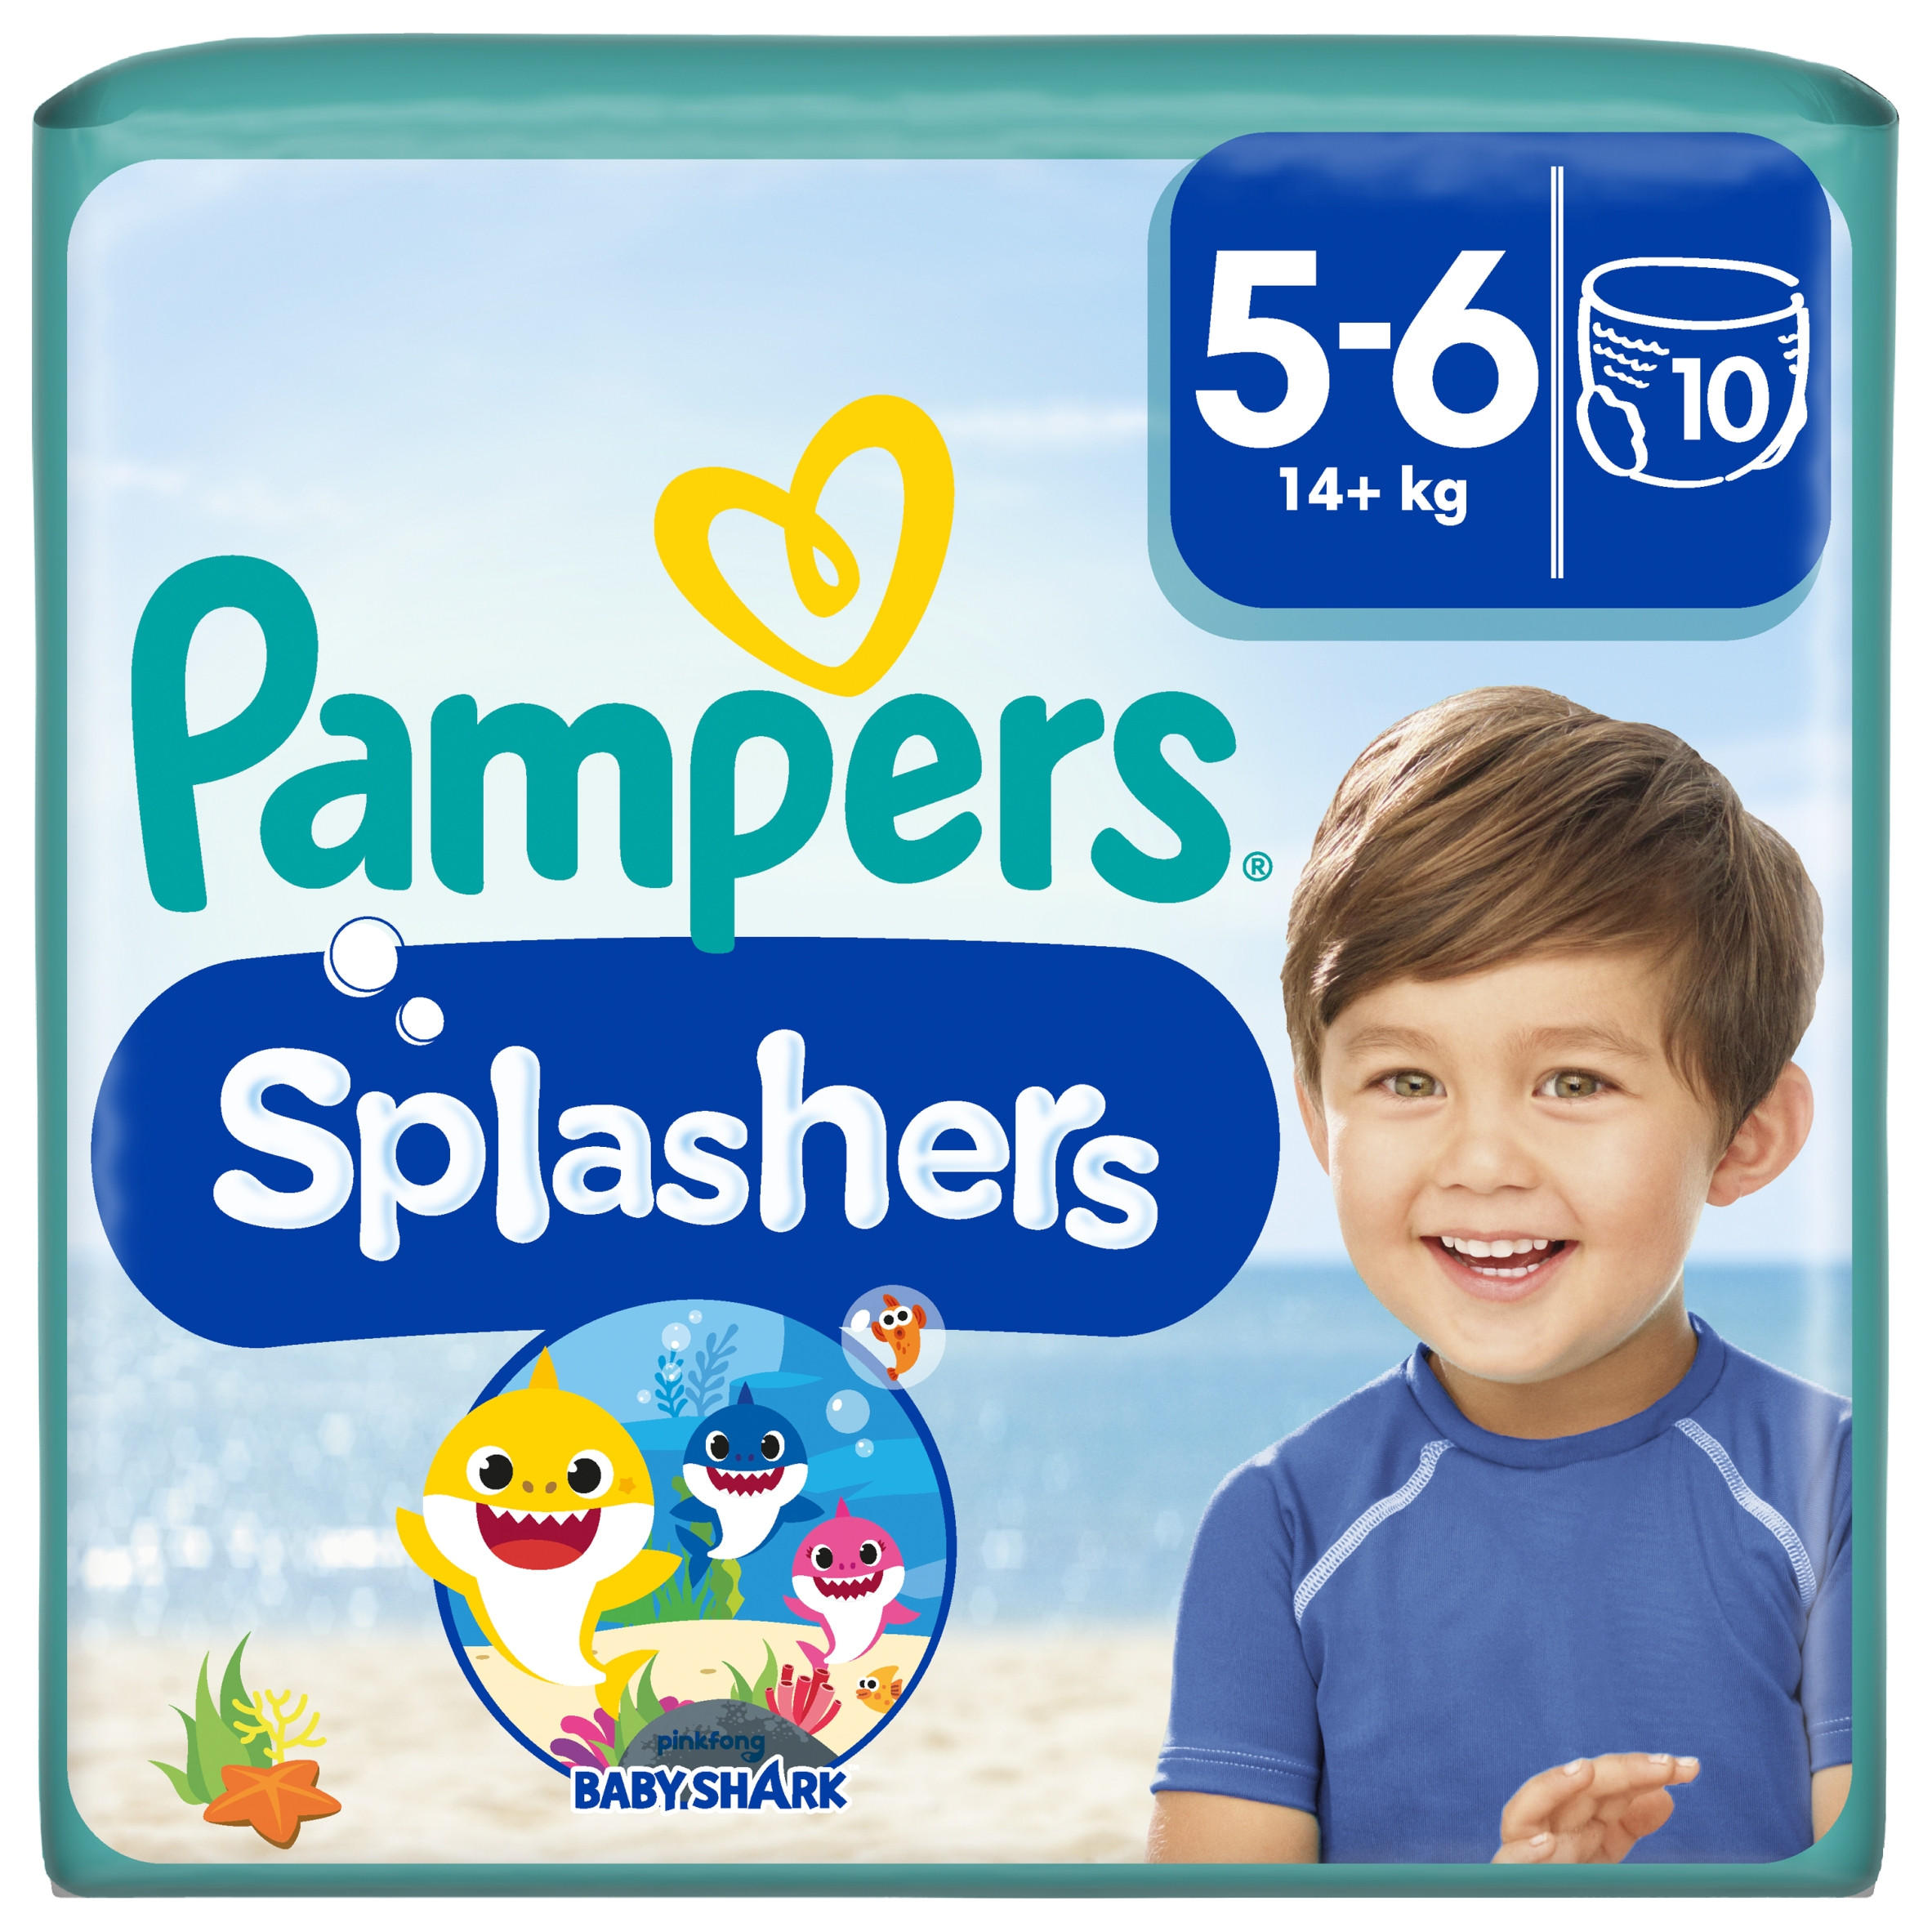 Pampers Splashers Baby Shark Edition Size 5-6, 14kg+, 10 Disposable Swim  Nappy Pants, Baby & Toddler